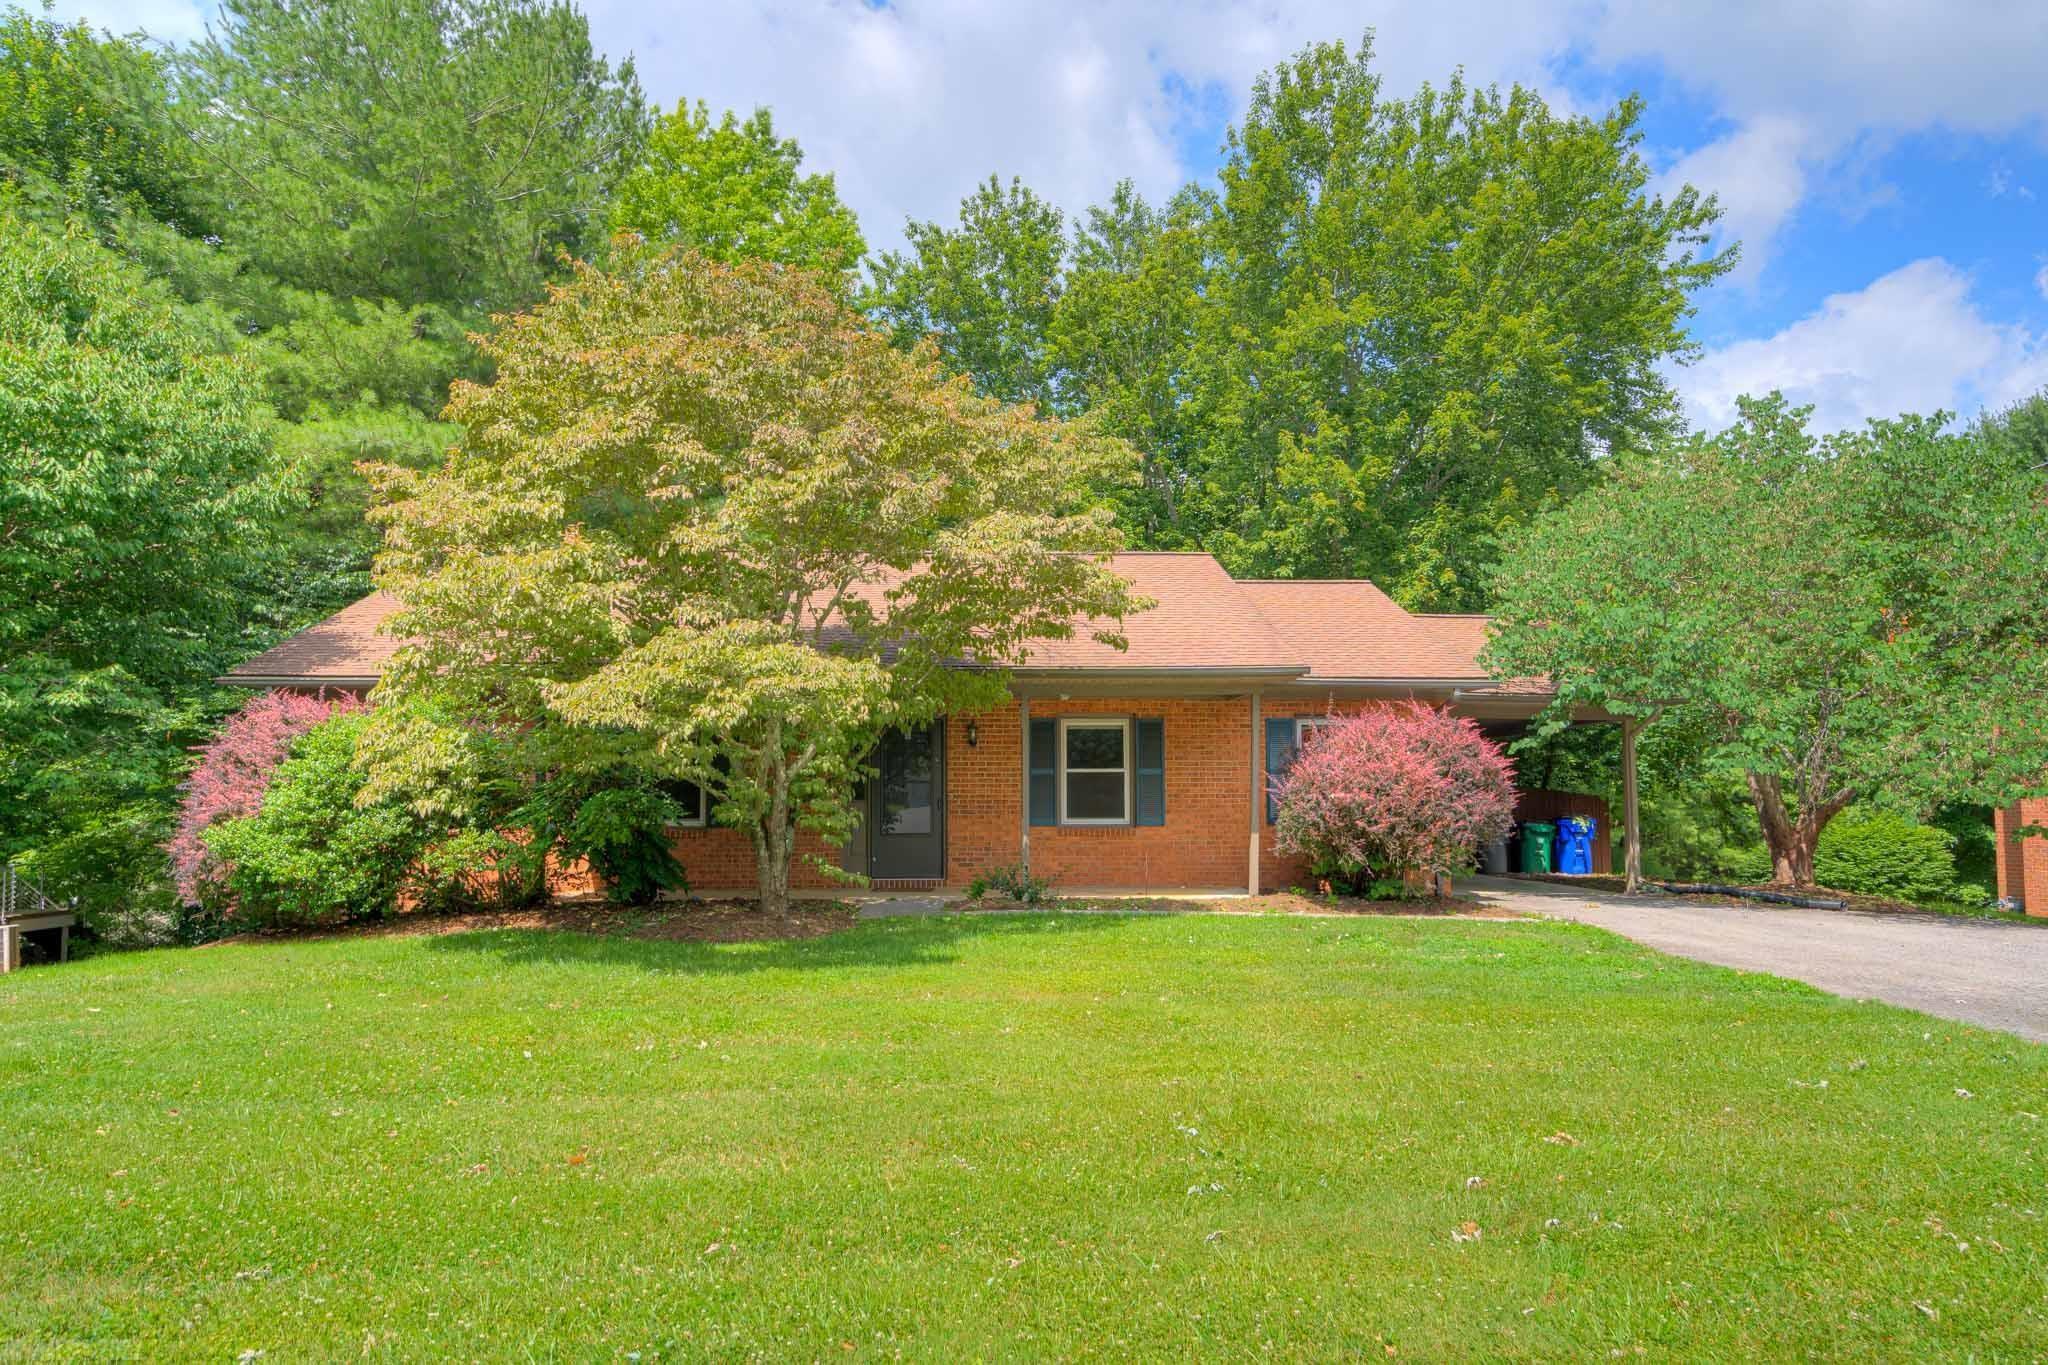 Come enjoy this spacious brick home conveniently located next to schools, shopping and VT.  The fenced in private back yard is great for entertaining or go on a bike ride on the adjoining bike path. Come explore all this home has to offer today.